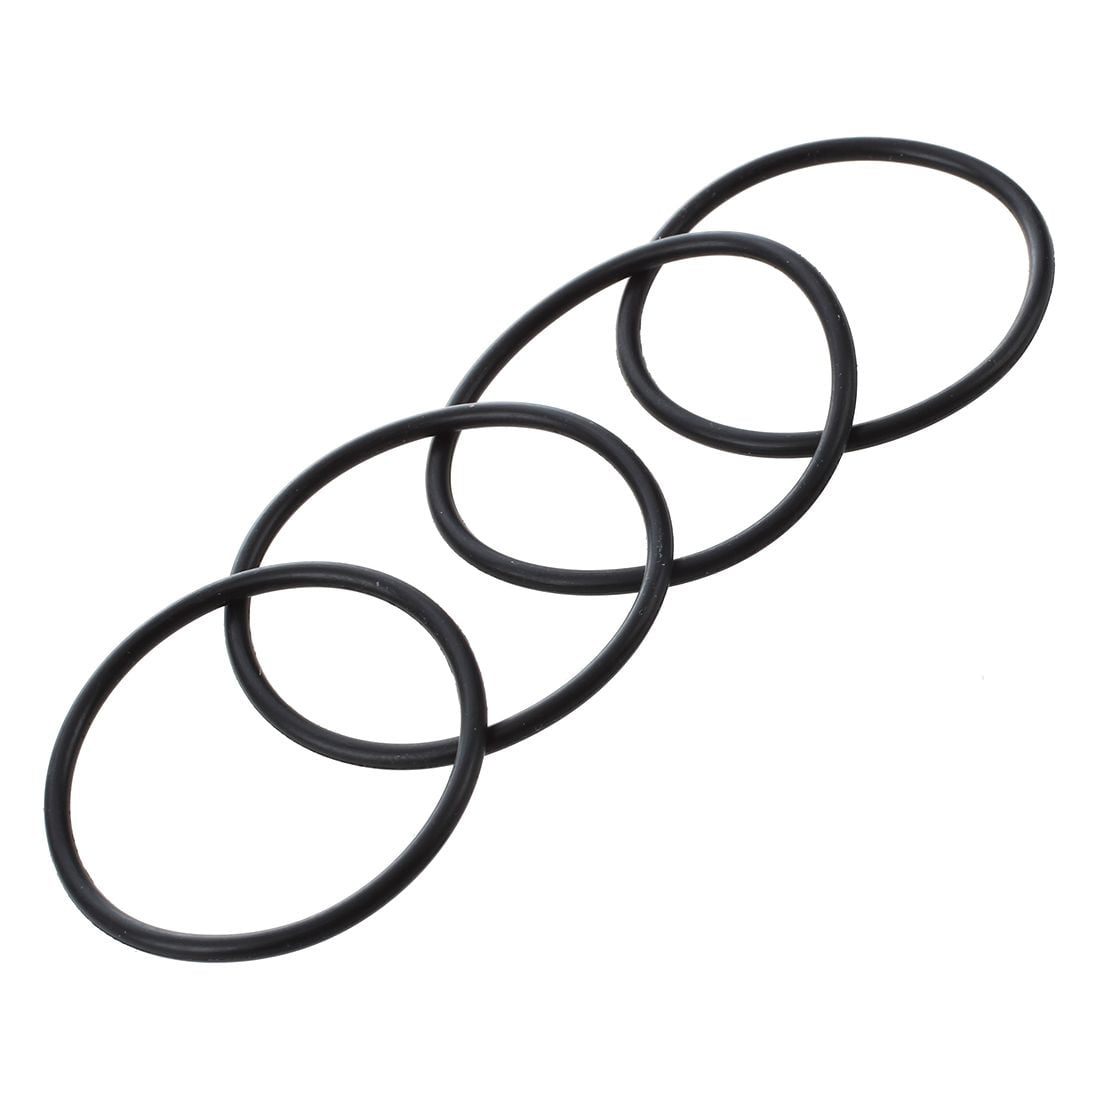 10 Pcs 35mm x 2mm Industrial Flexible Rubber O Ring Seal Washer K5F1 